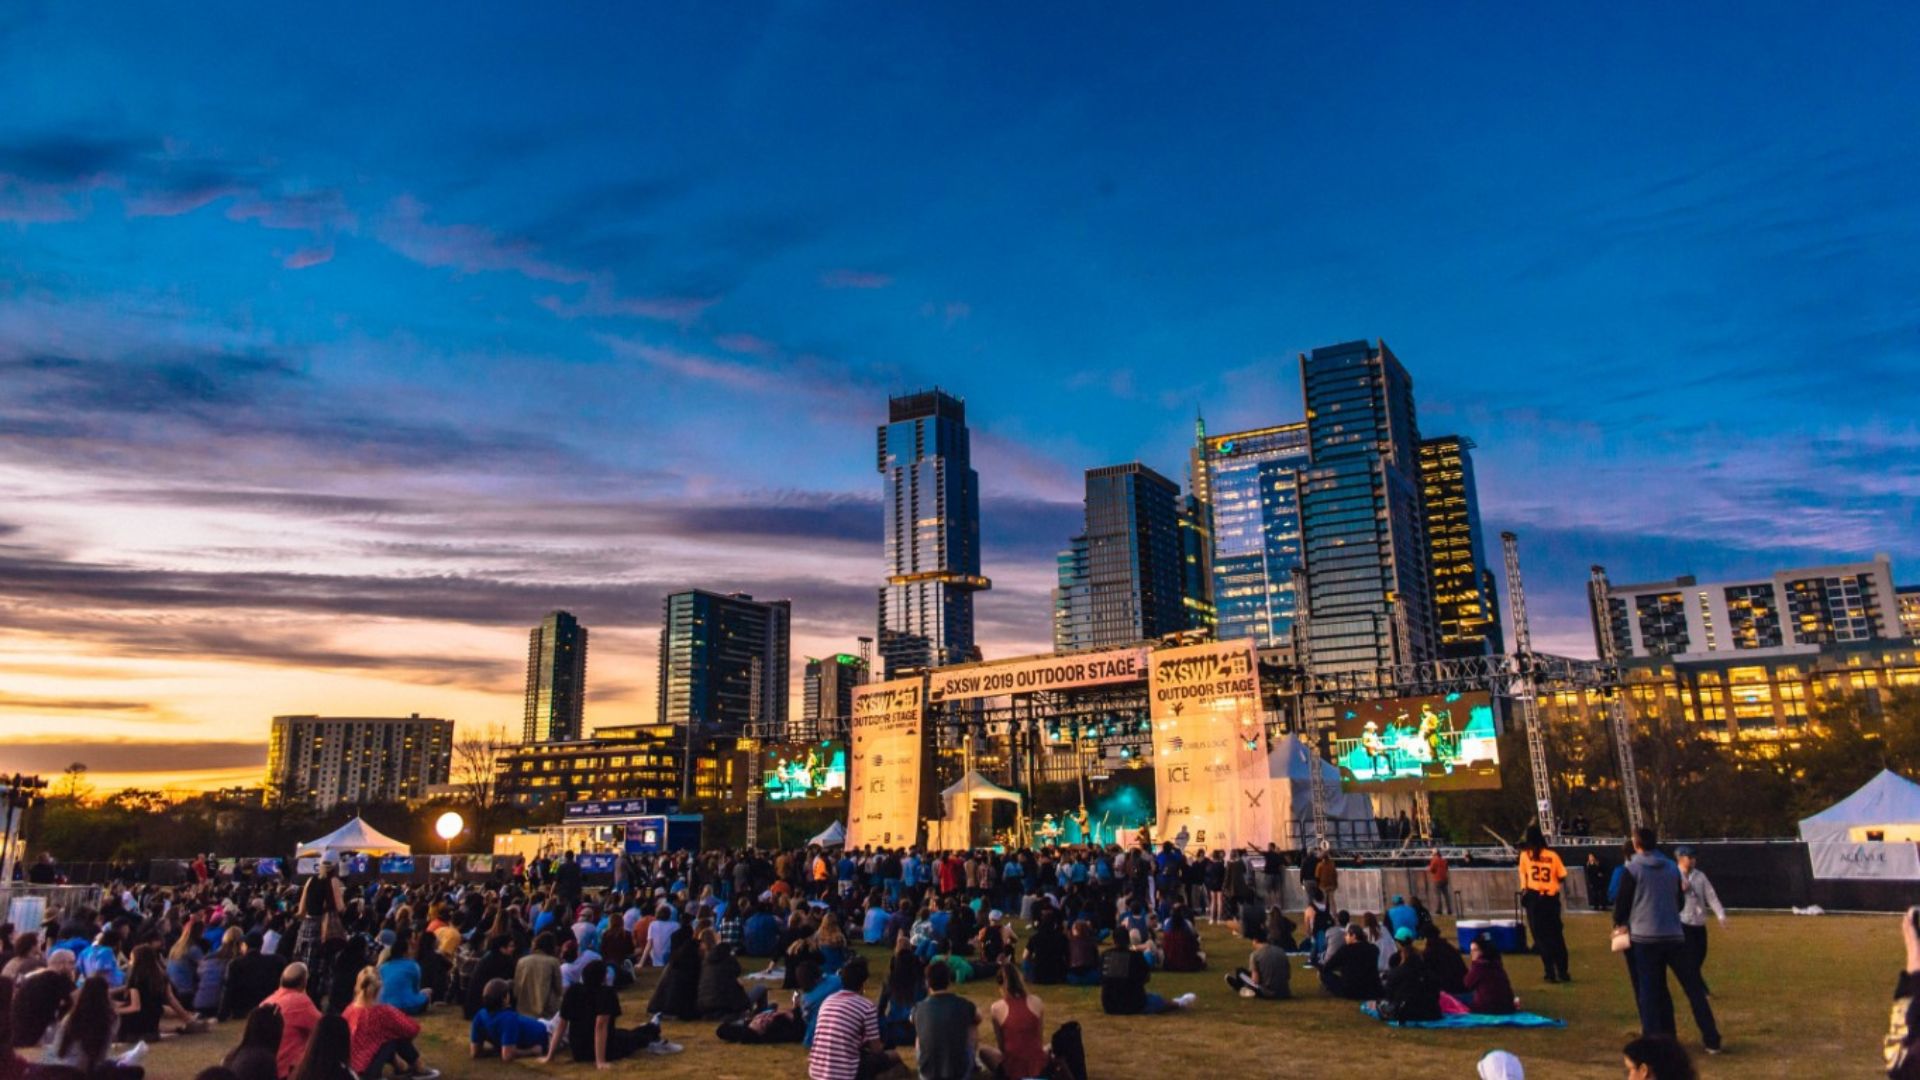 Austin prepares for Spring festivities: SXSW, Texas Relays, and more